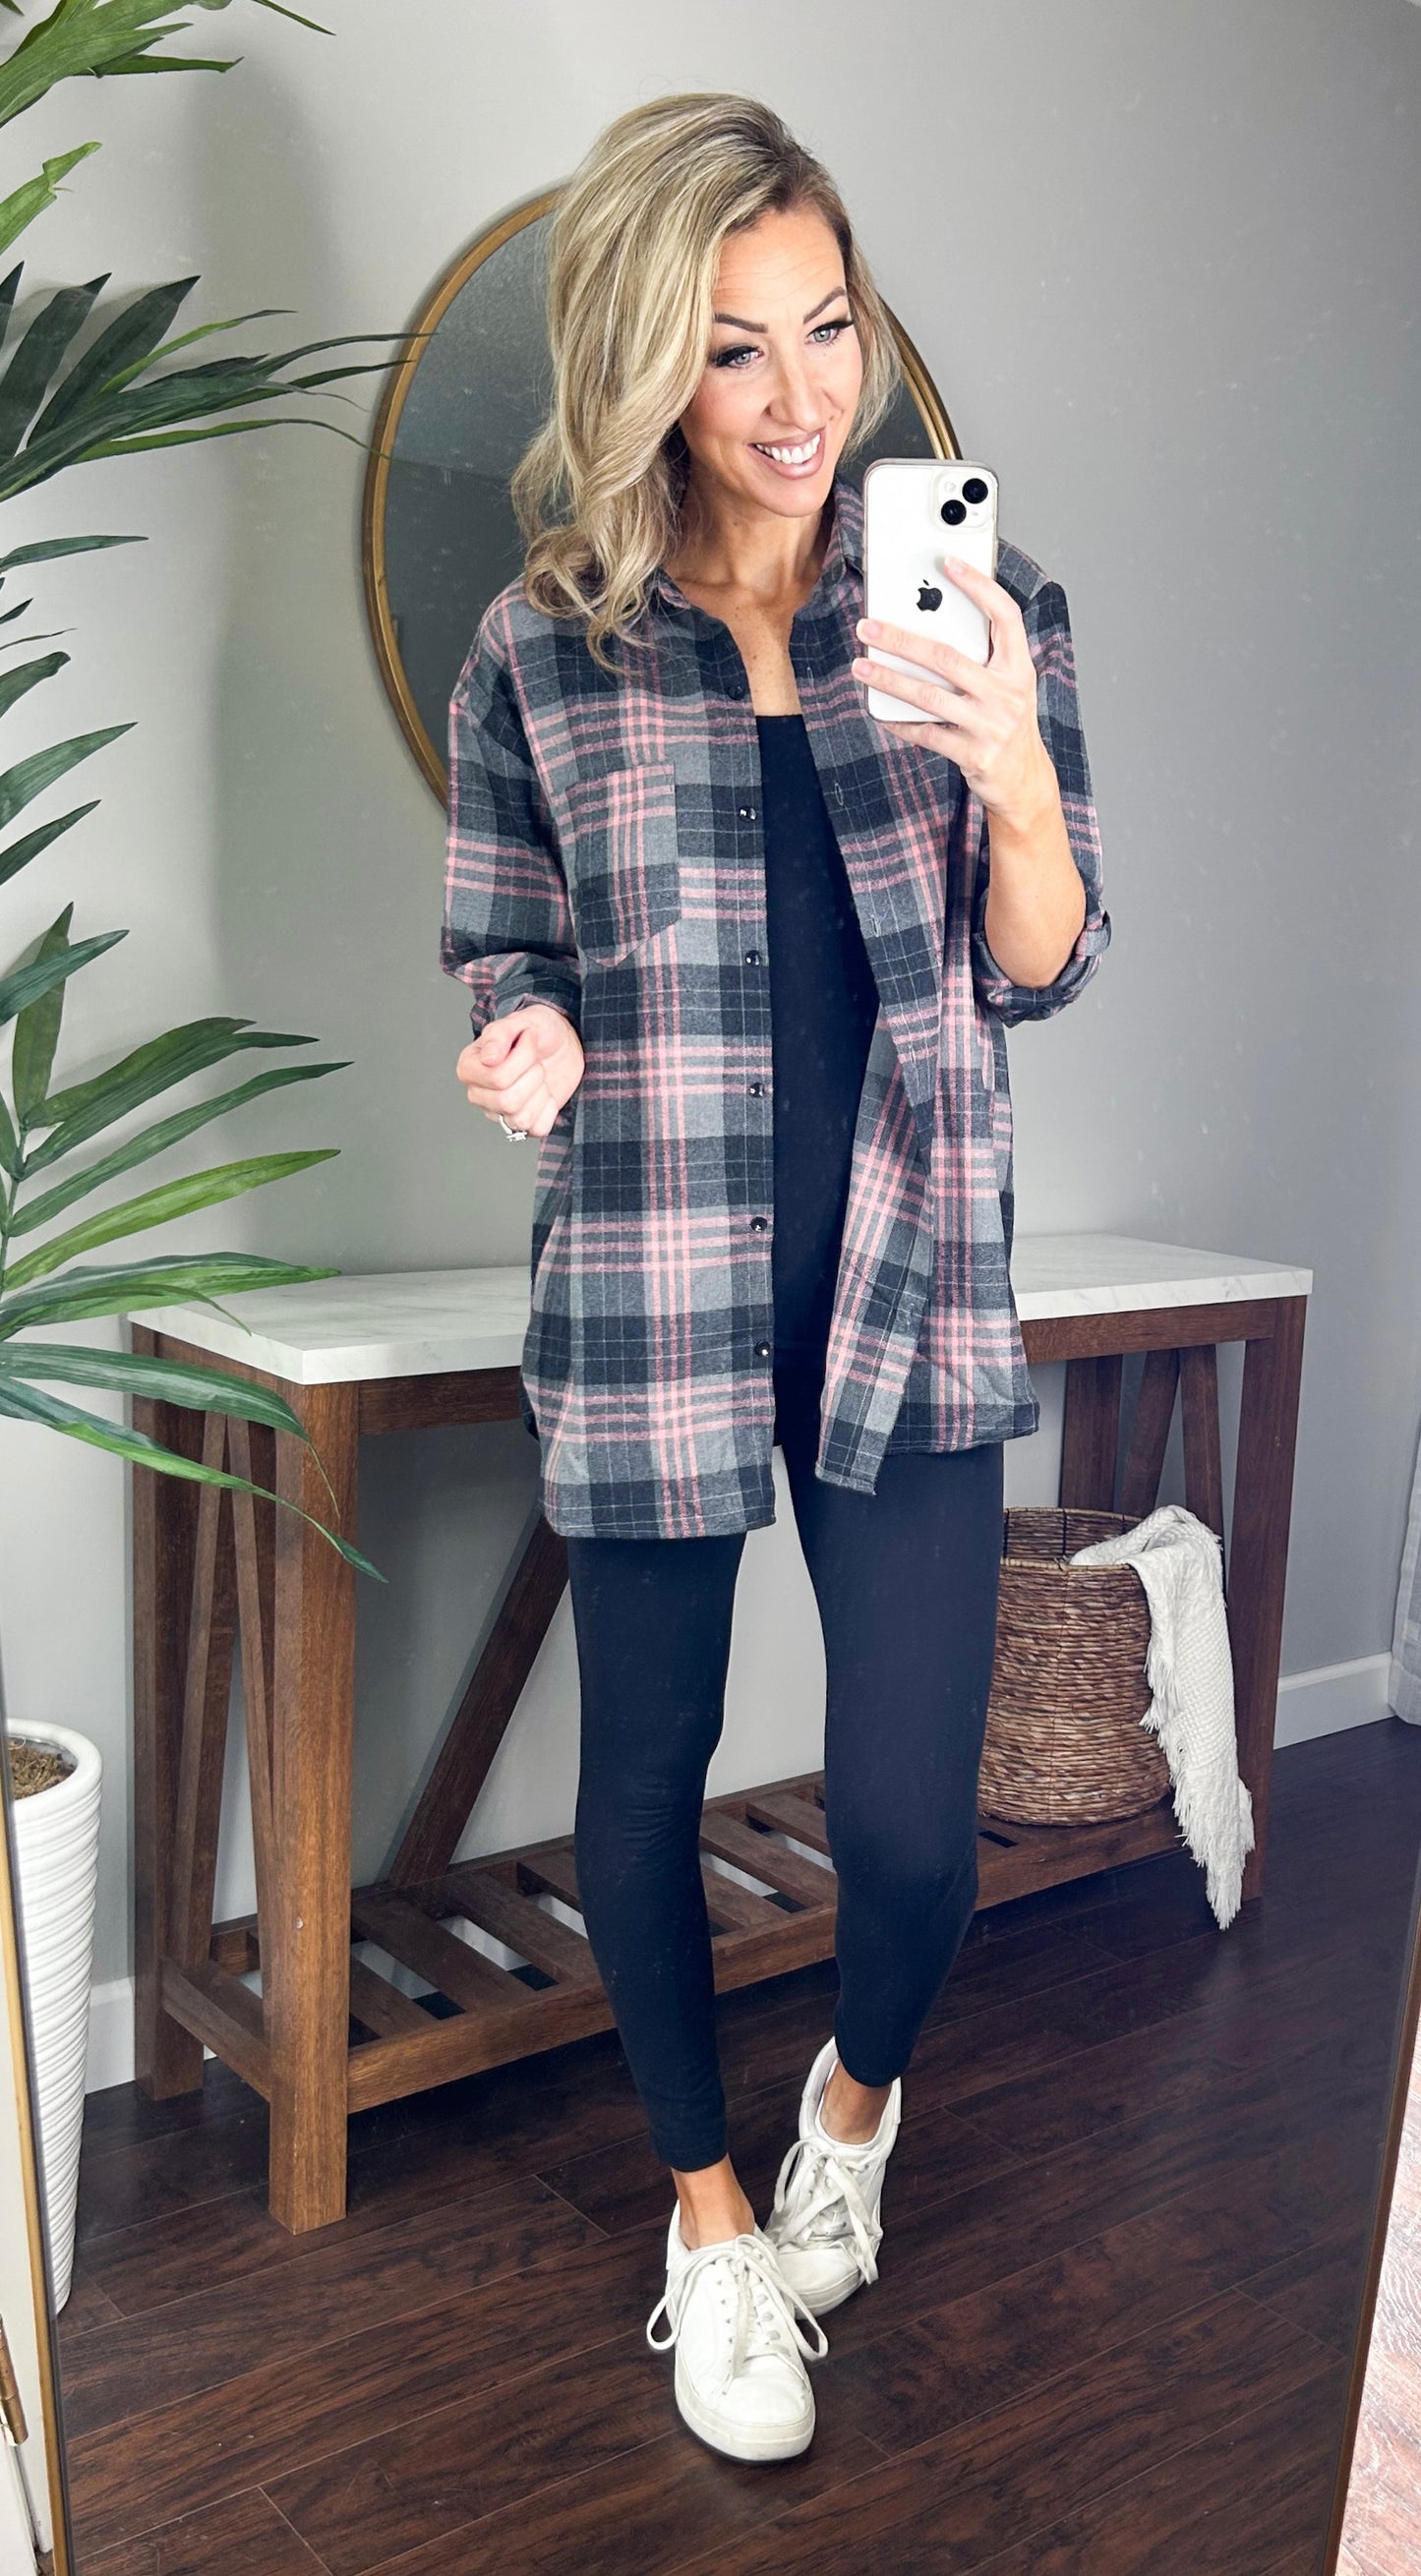 Allery Long Oversized Plaid Flannel Button Up Top (Black)